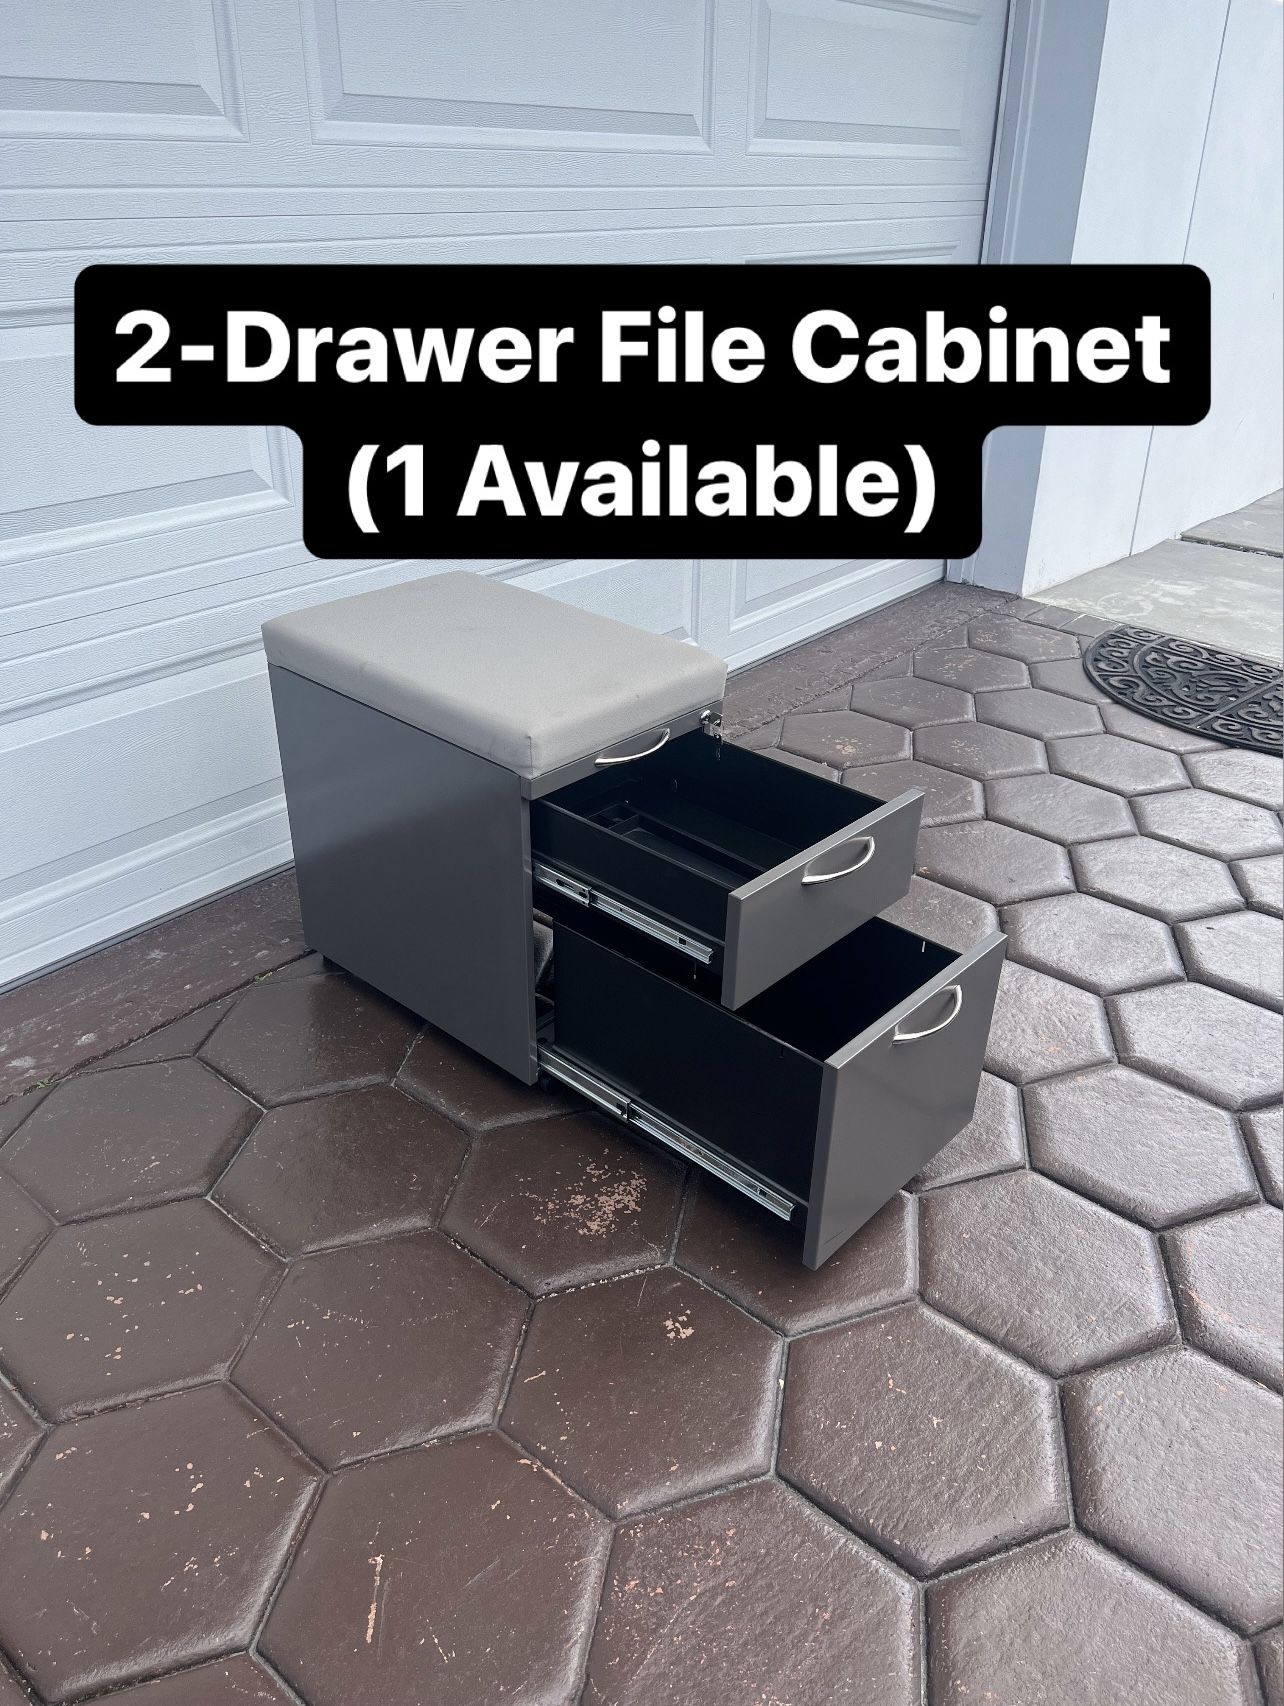 Office 2-Drawer File Cabinet With Keys (1 Available) PickUp Available Today